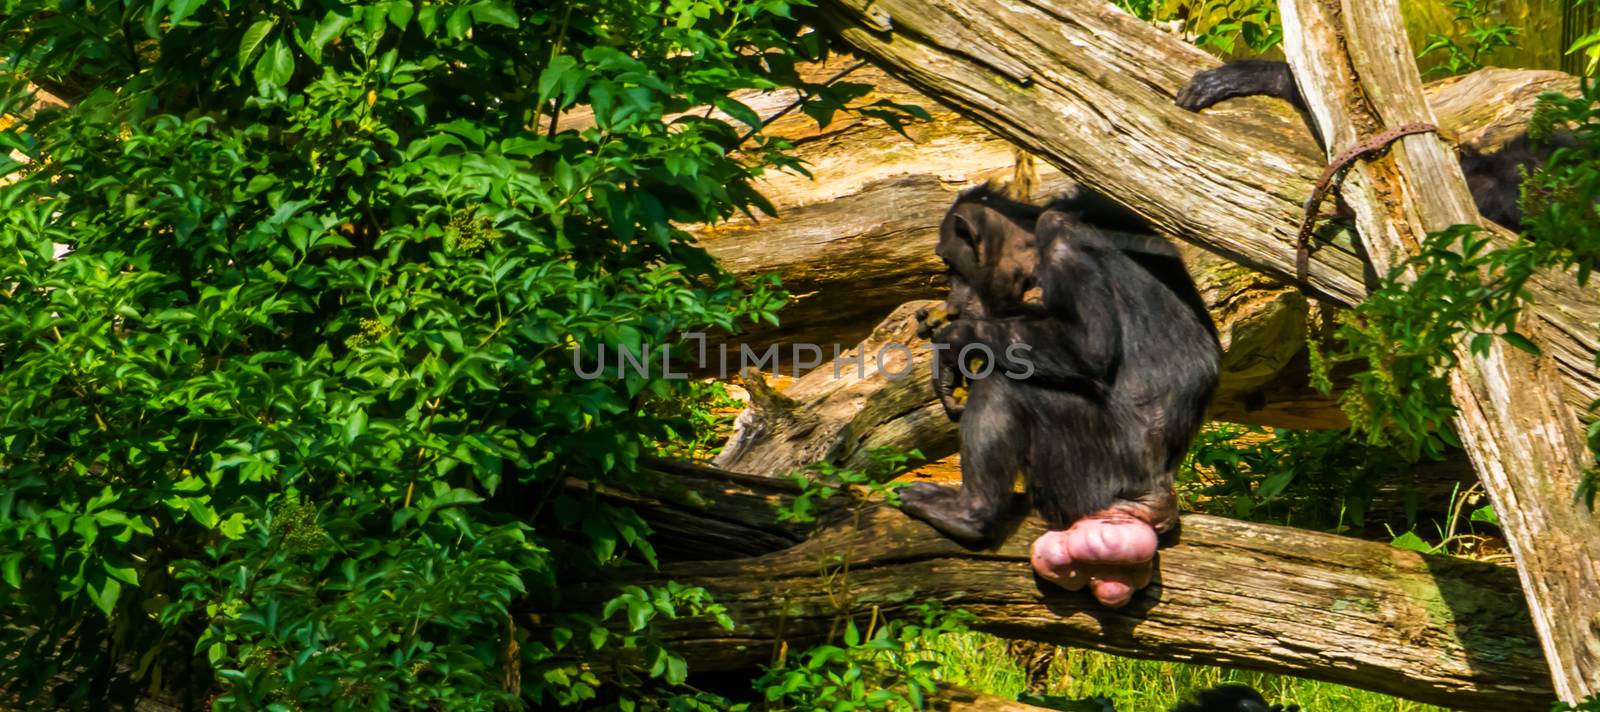 chimpanzee with many genital swellings, Tumescence by hormones, Endangered animal specie from Africa by charlottebleijenberg